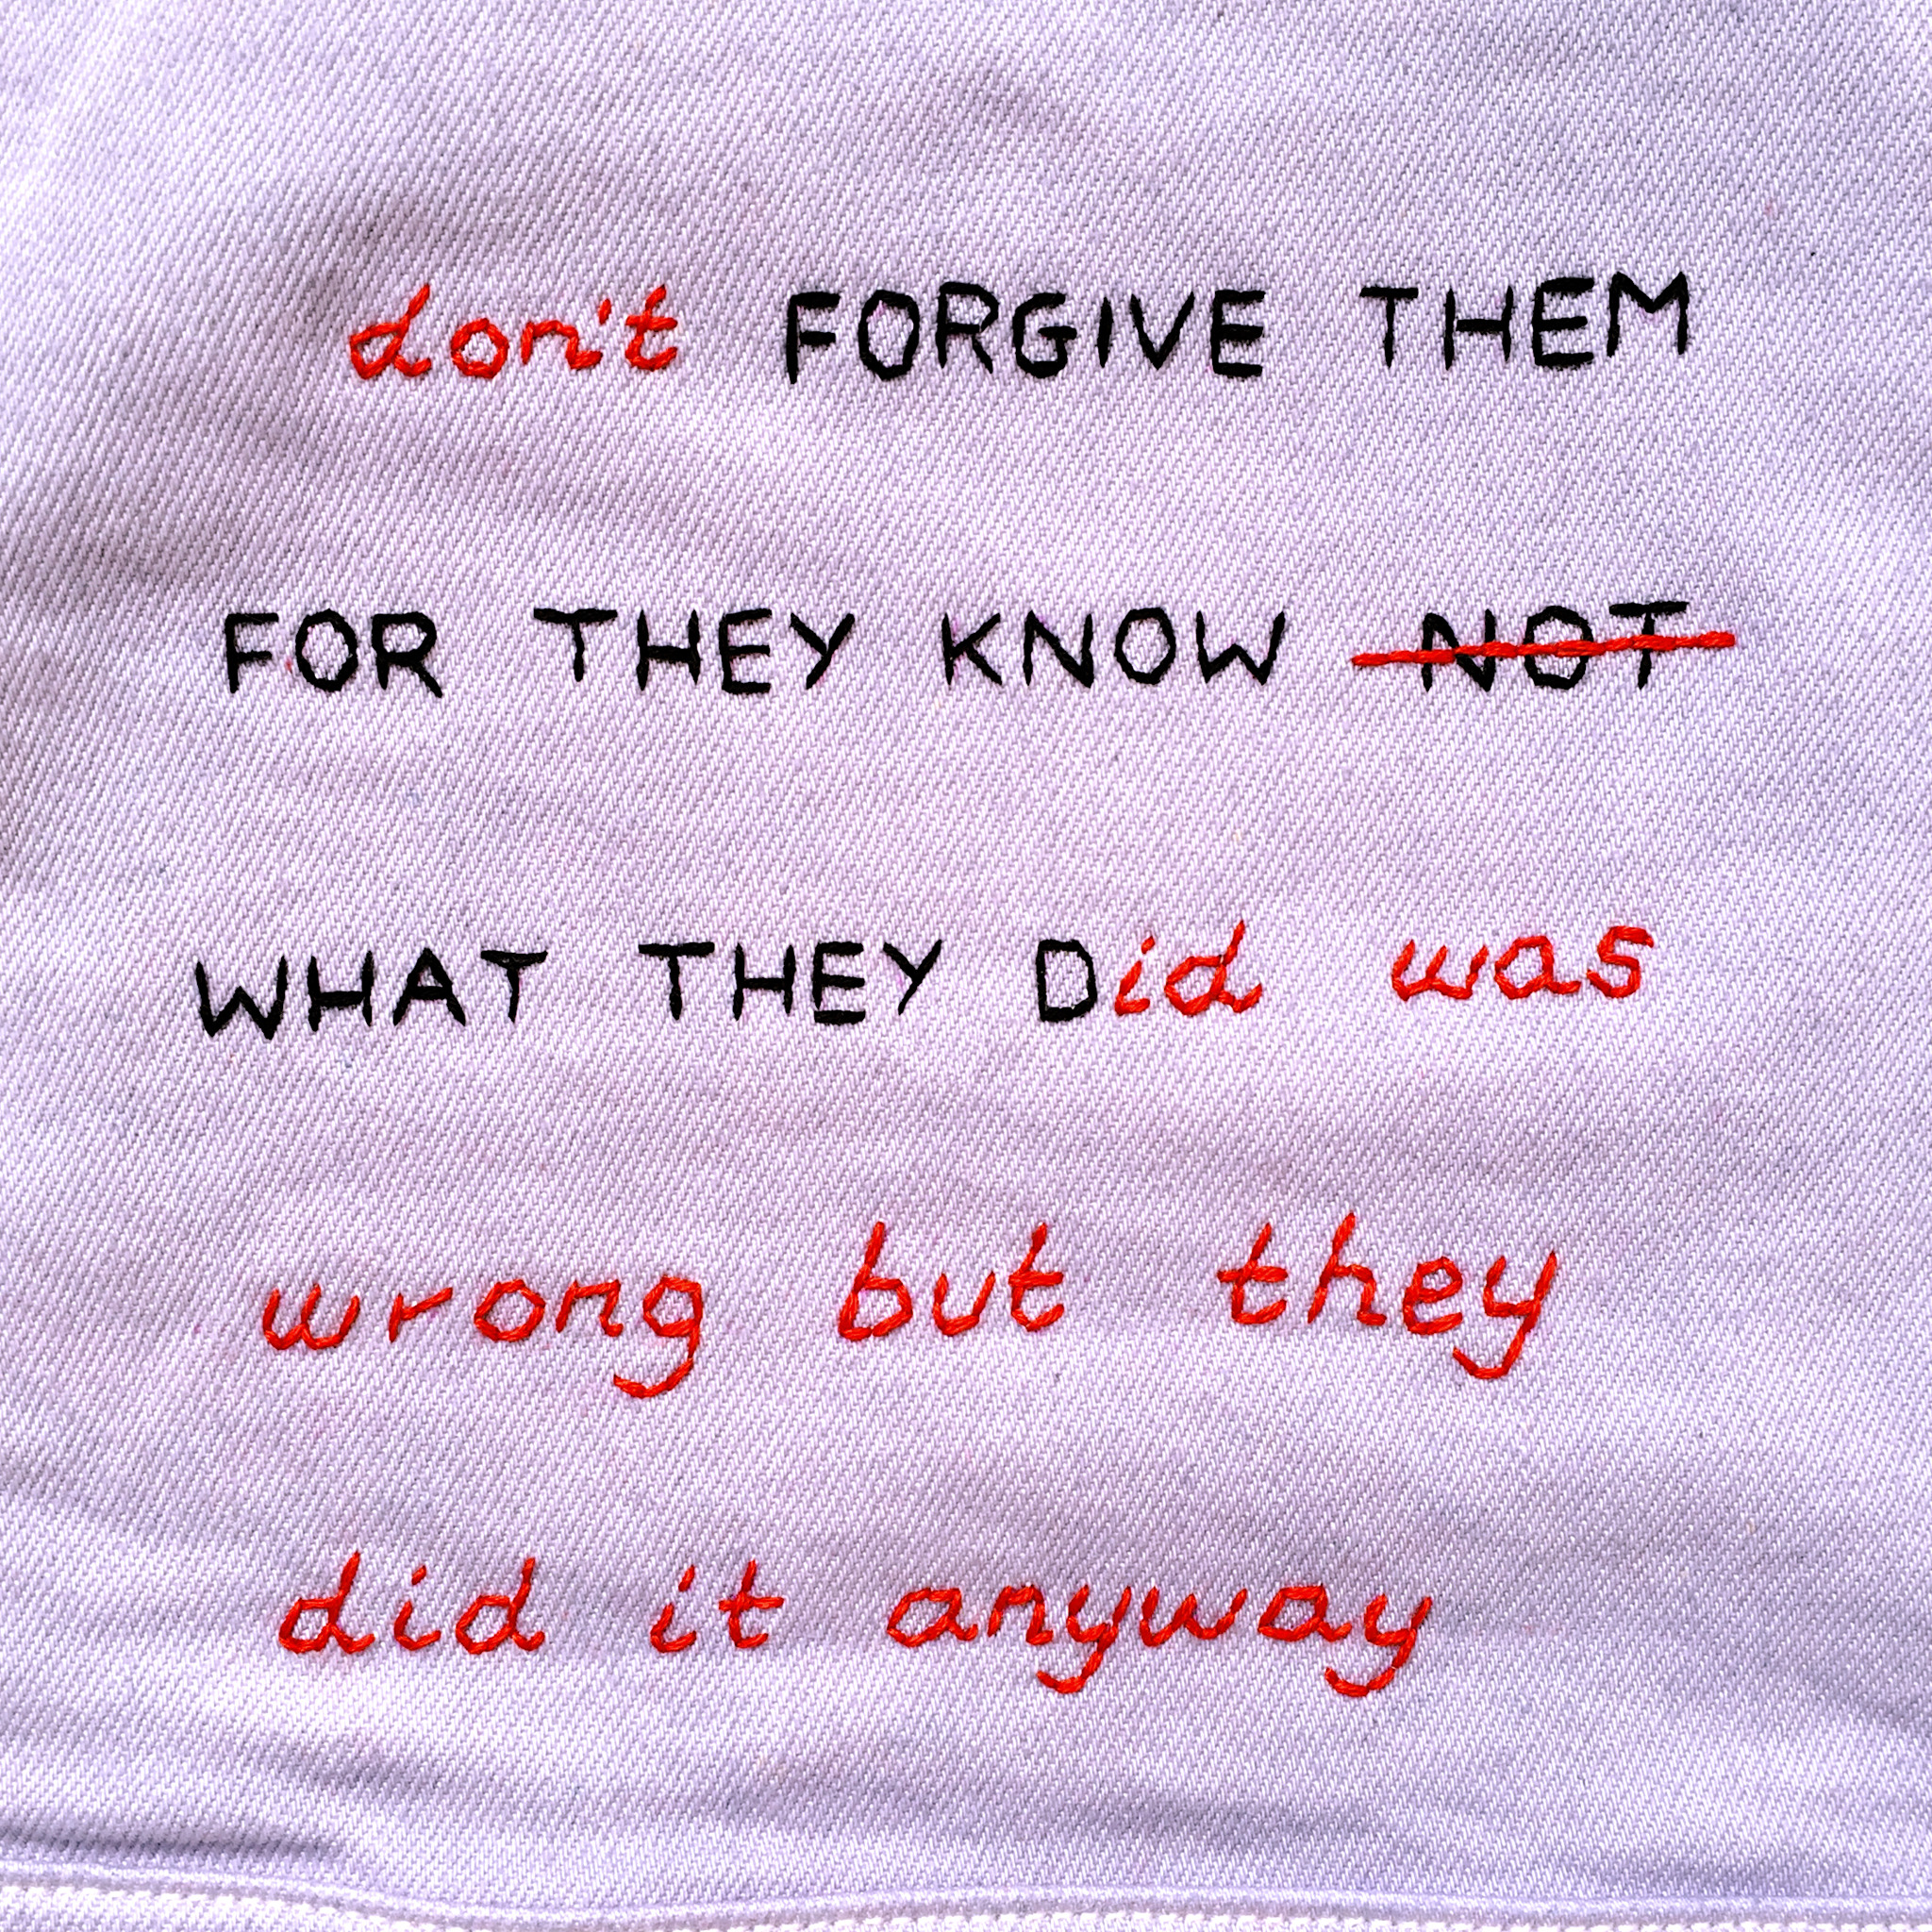 embroidered "don't forgive them, for they know what they did was wrong but they did it anyway", 2018, Sophie King